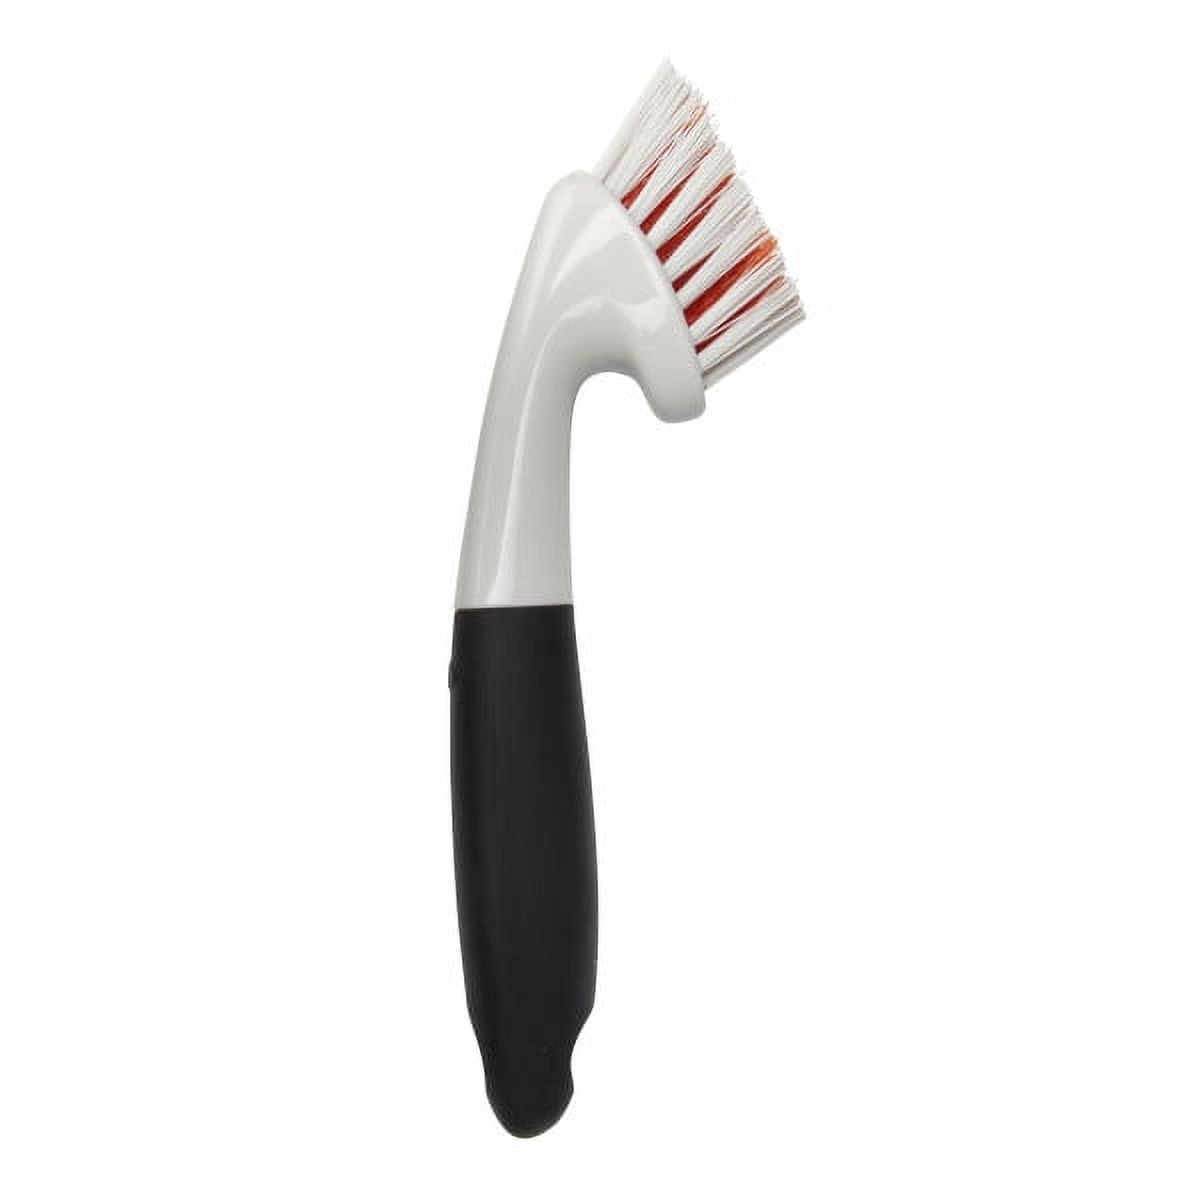 OXO 12274200 Good Grips Electronics Cleaning Brush - Grey